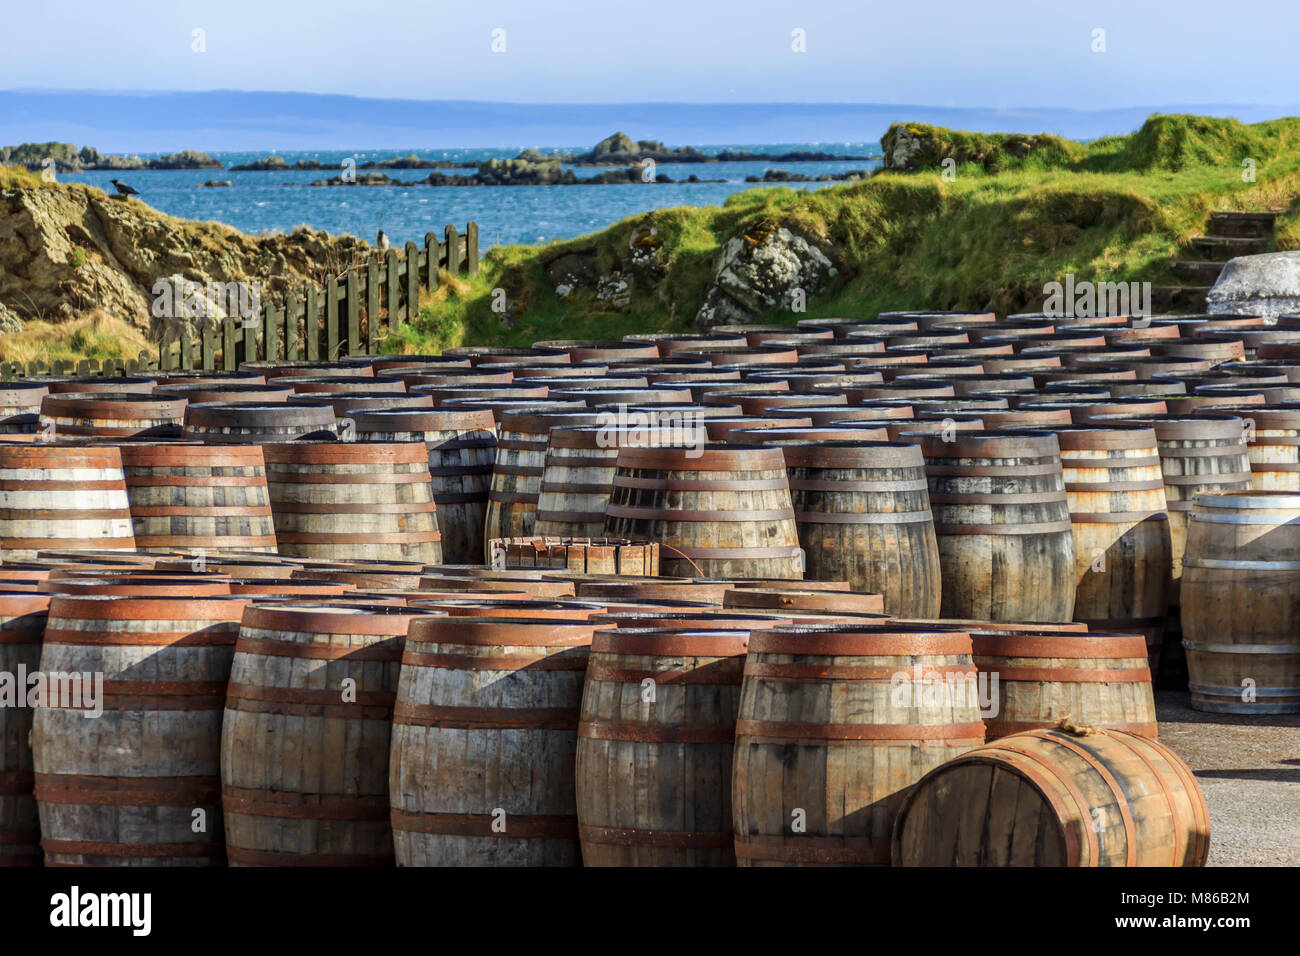 Rows of Islay Whisky Barrels stacked by the waterfront at a Scotch Distillery on the island of Islay, Scotland, UK Stock Photo